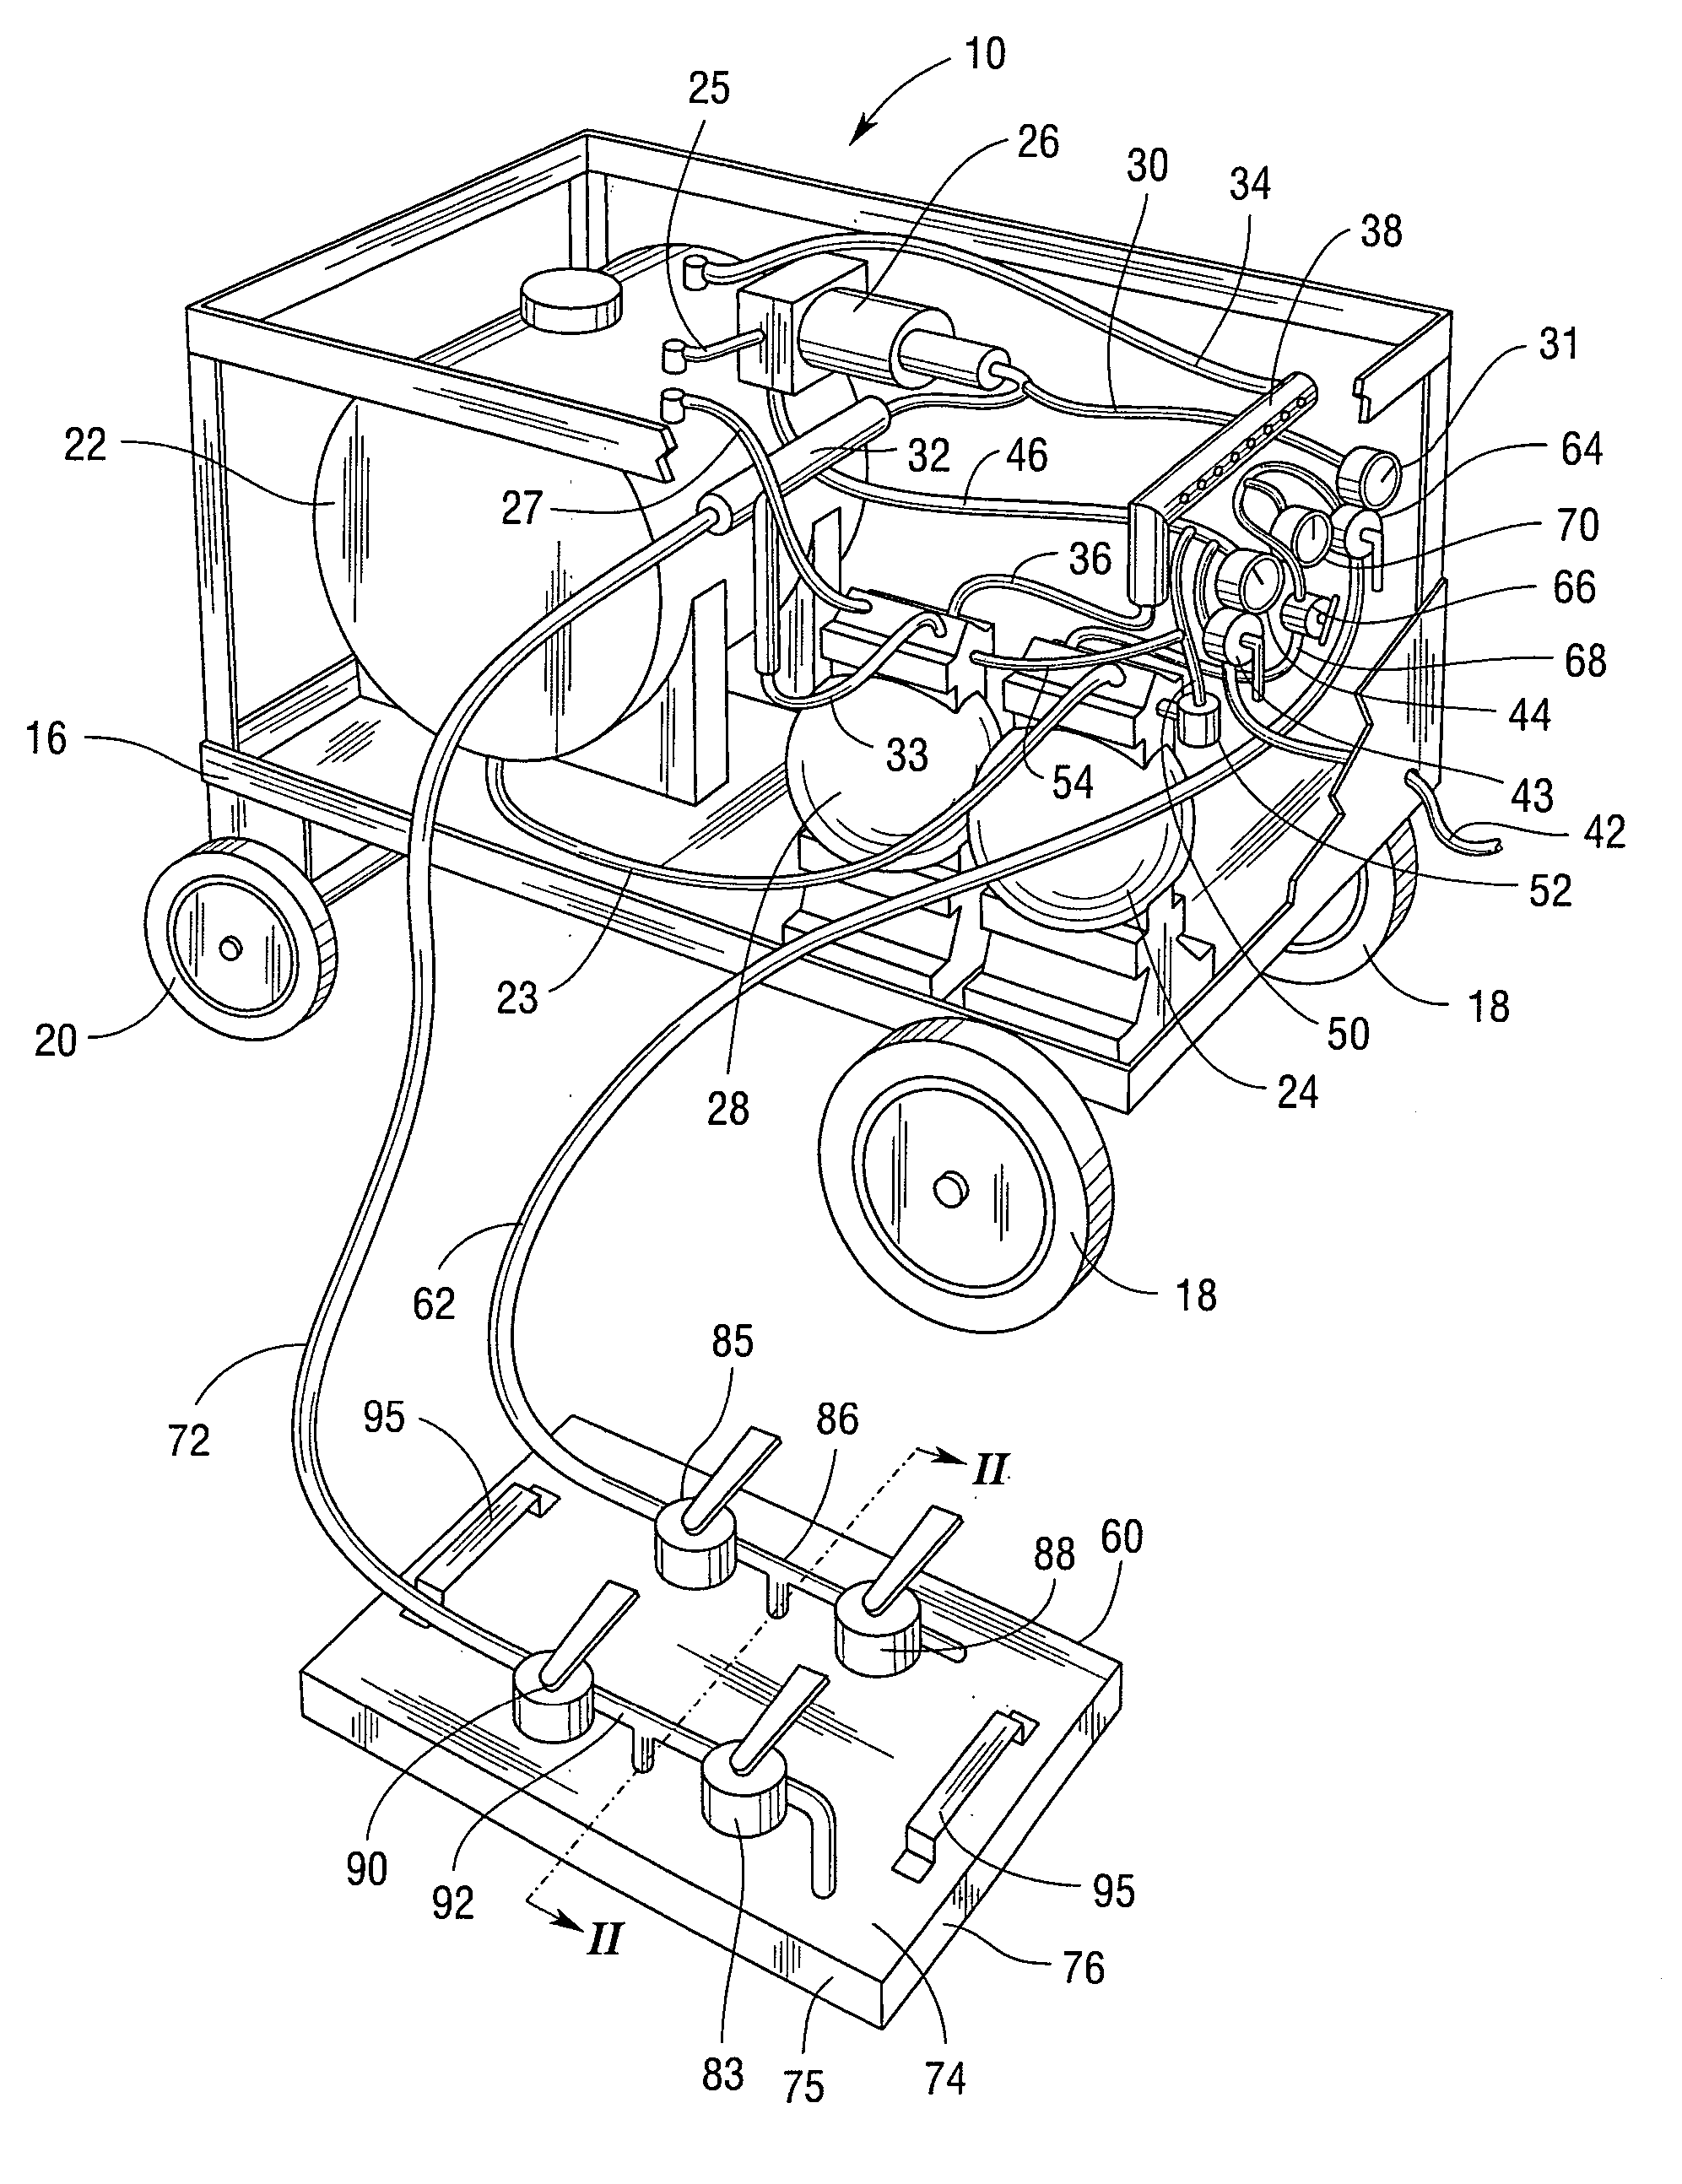 Apparatus and method for treating and impregnating porous structures